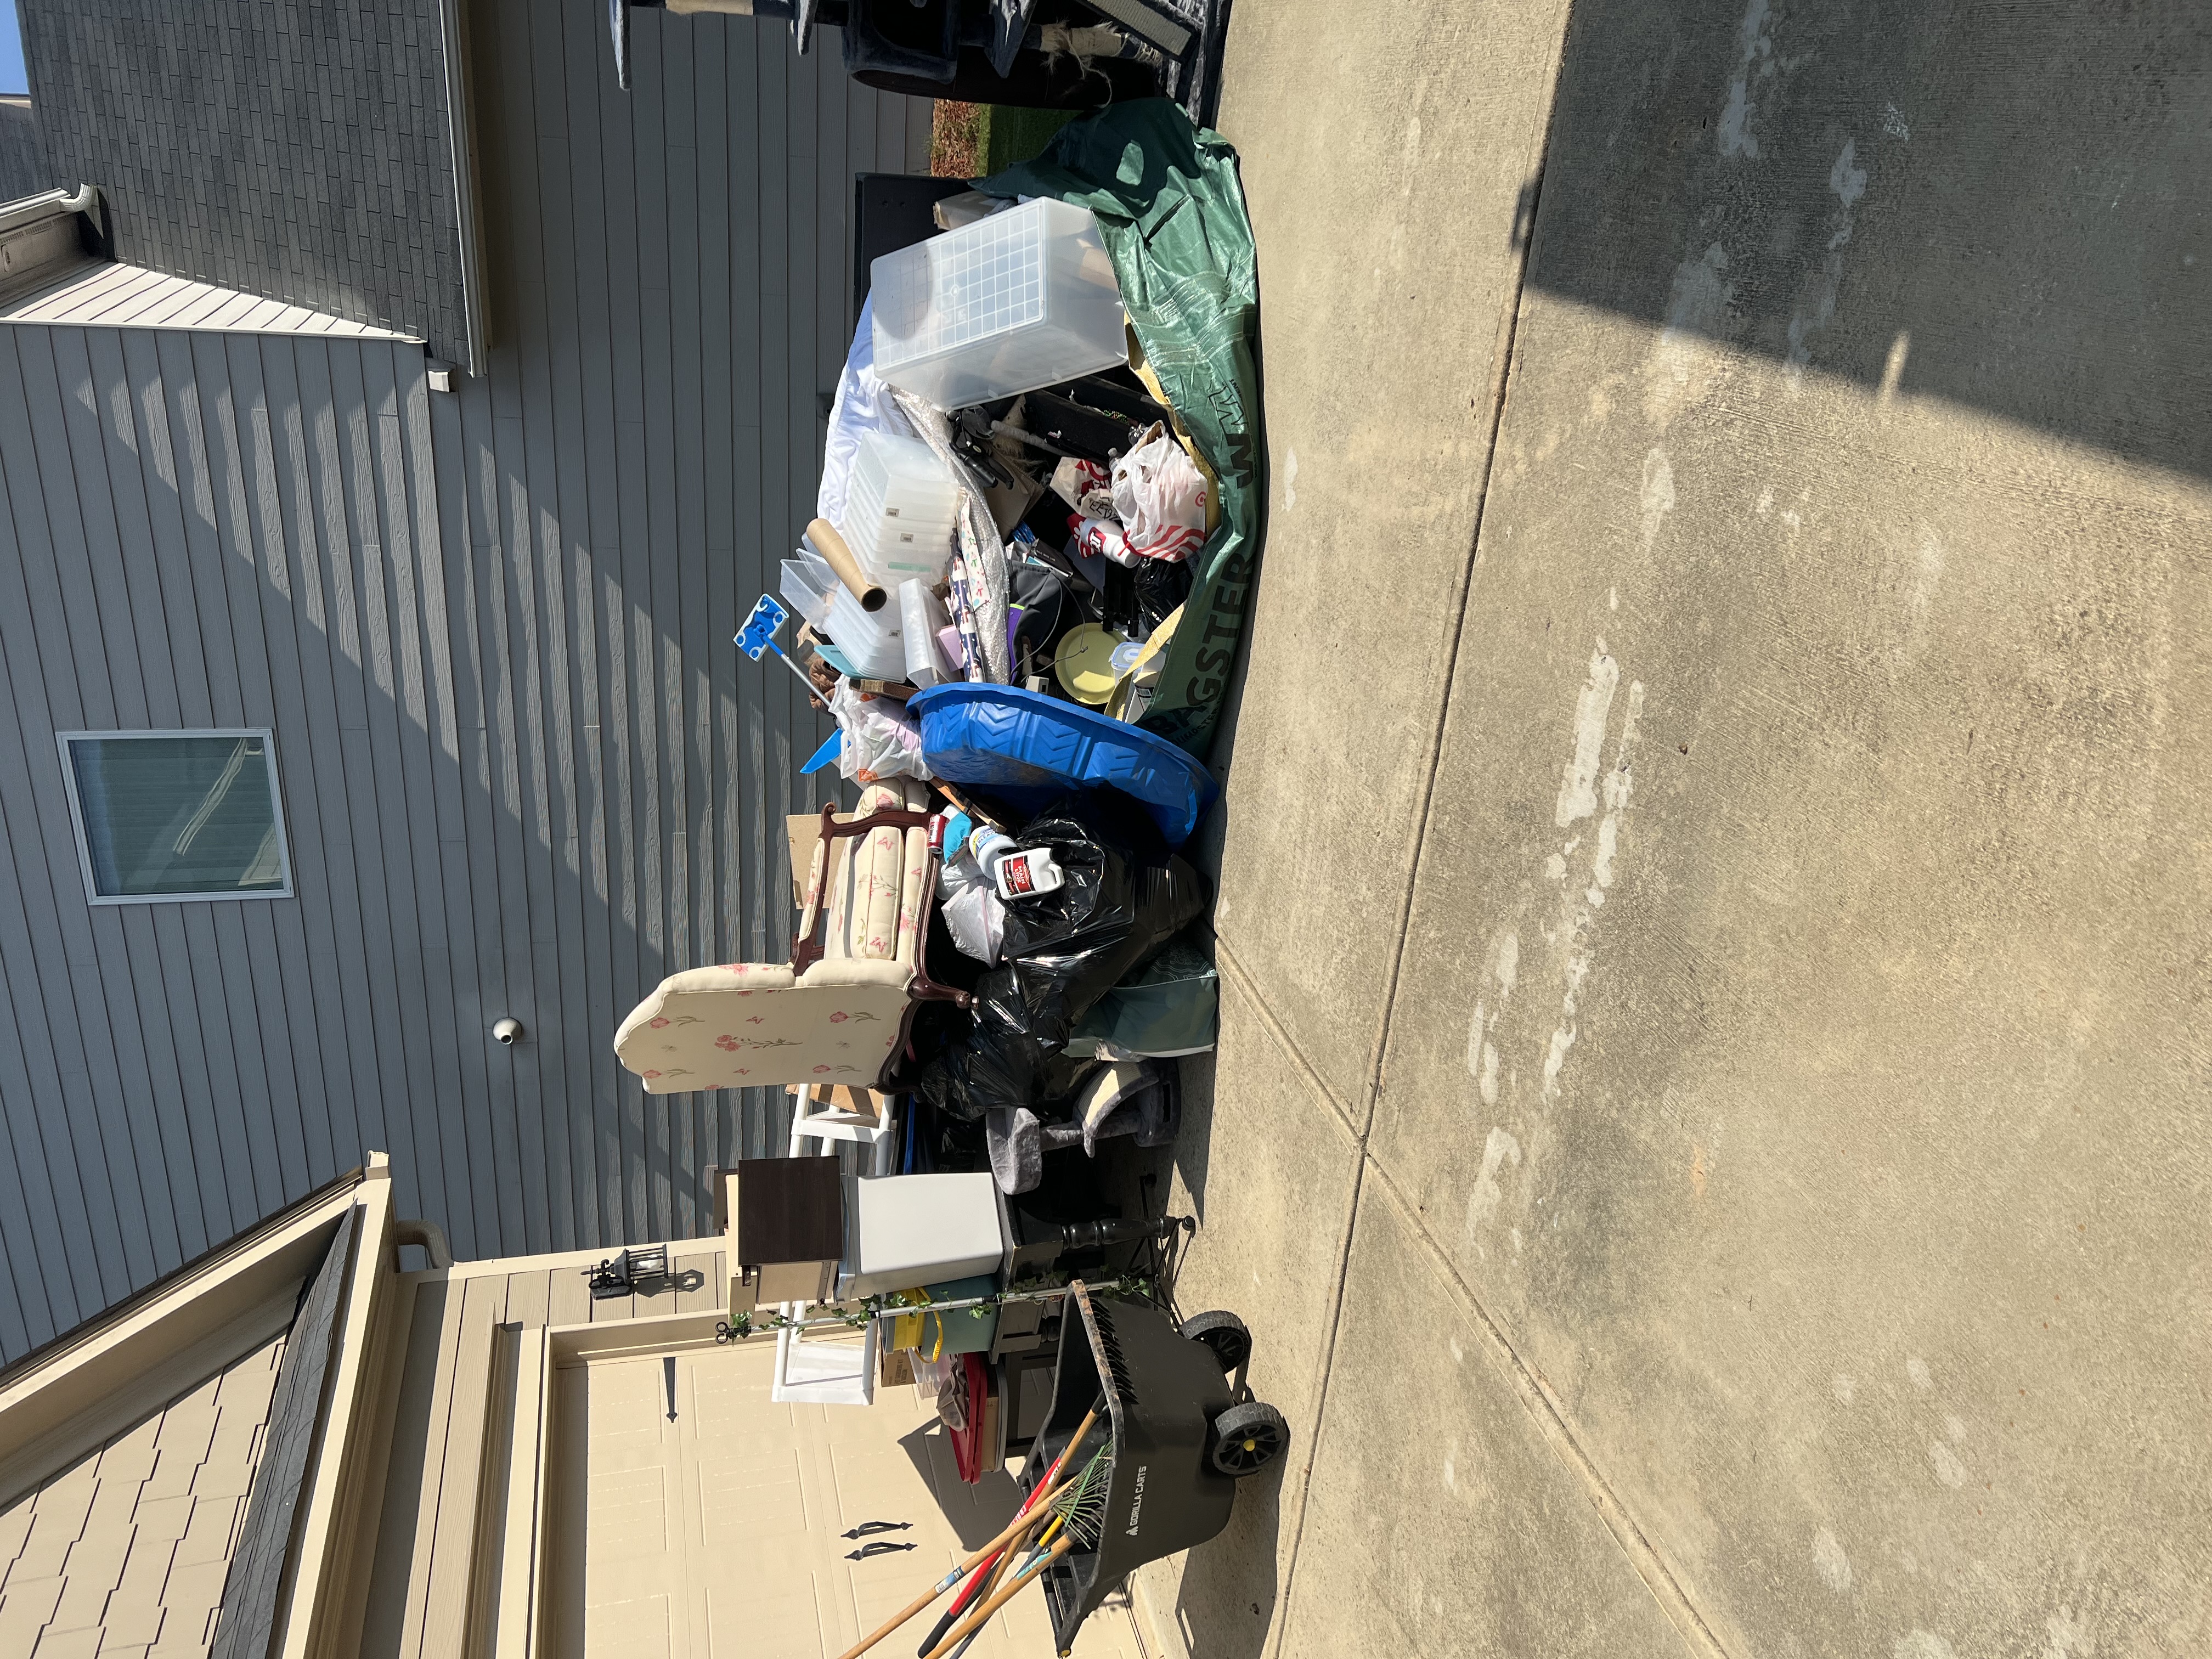 Junk Removal Service performed in Holly Springs, GA